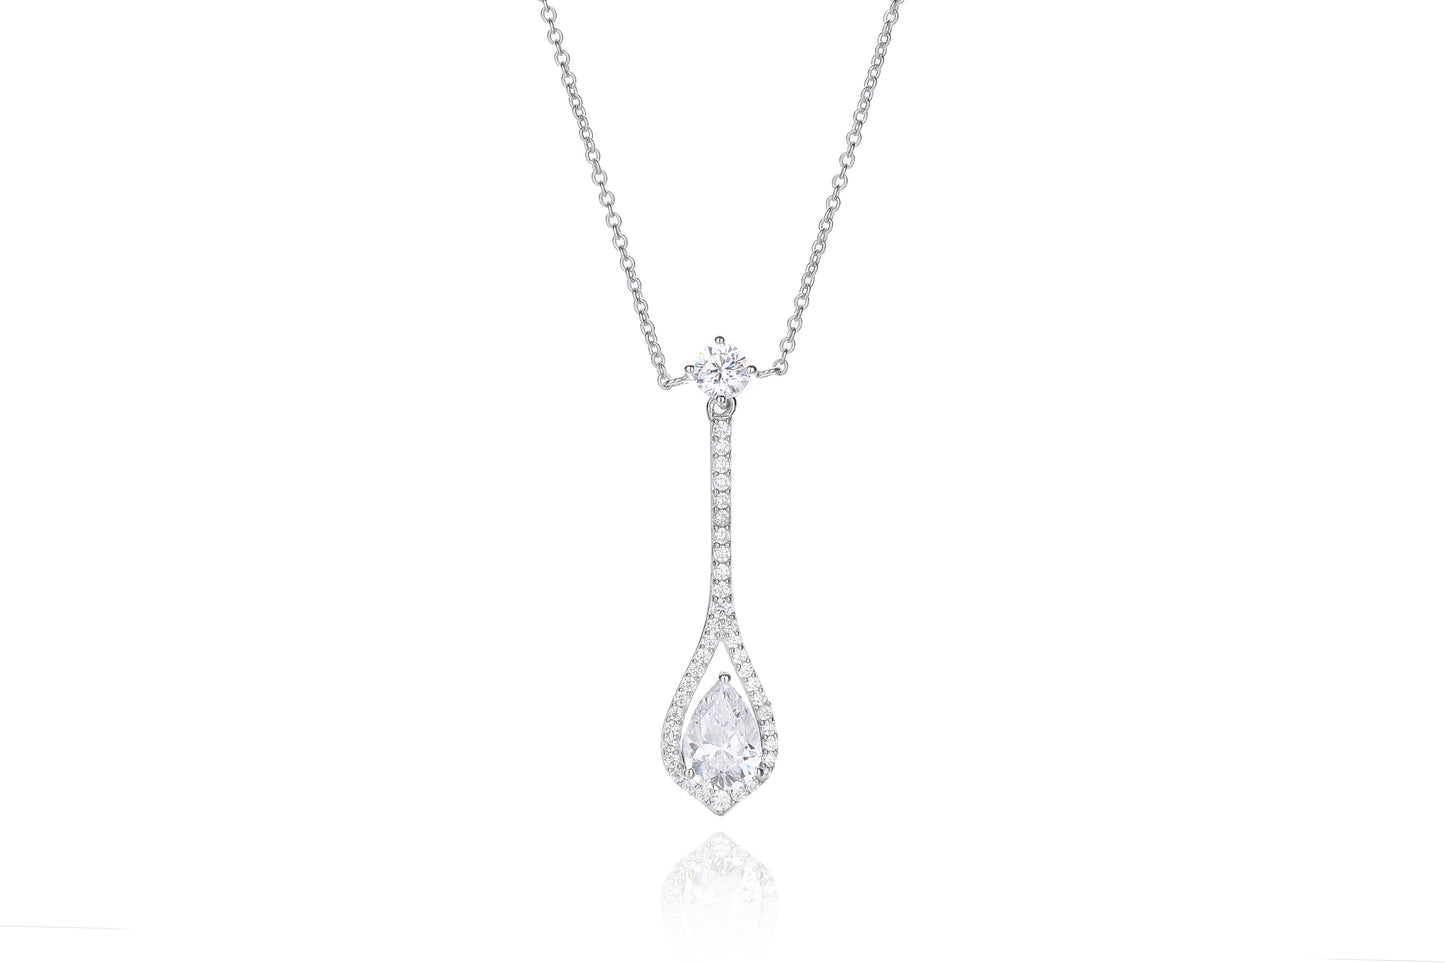 Silver CZ Pear Drop Earring and Necklace Set - John Ross Jewellers